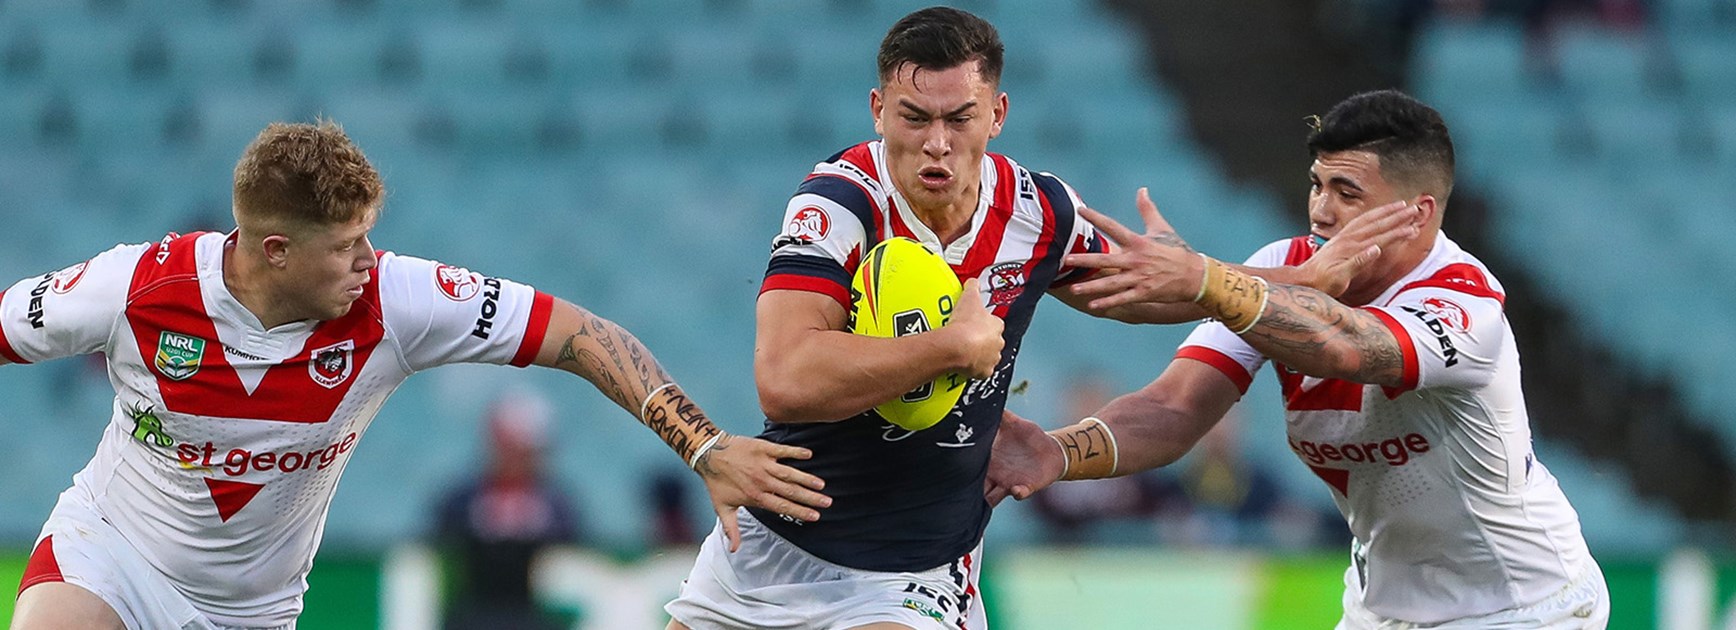 The Roosters beat the Dragons to move to the Holden Cup Grand Final.